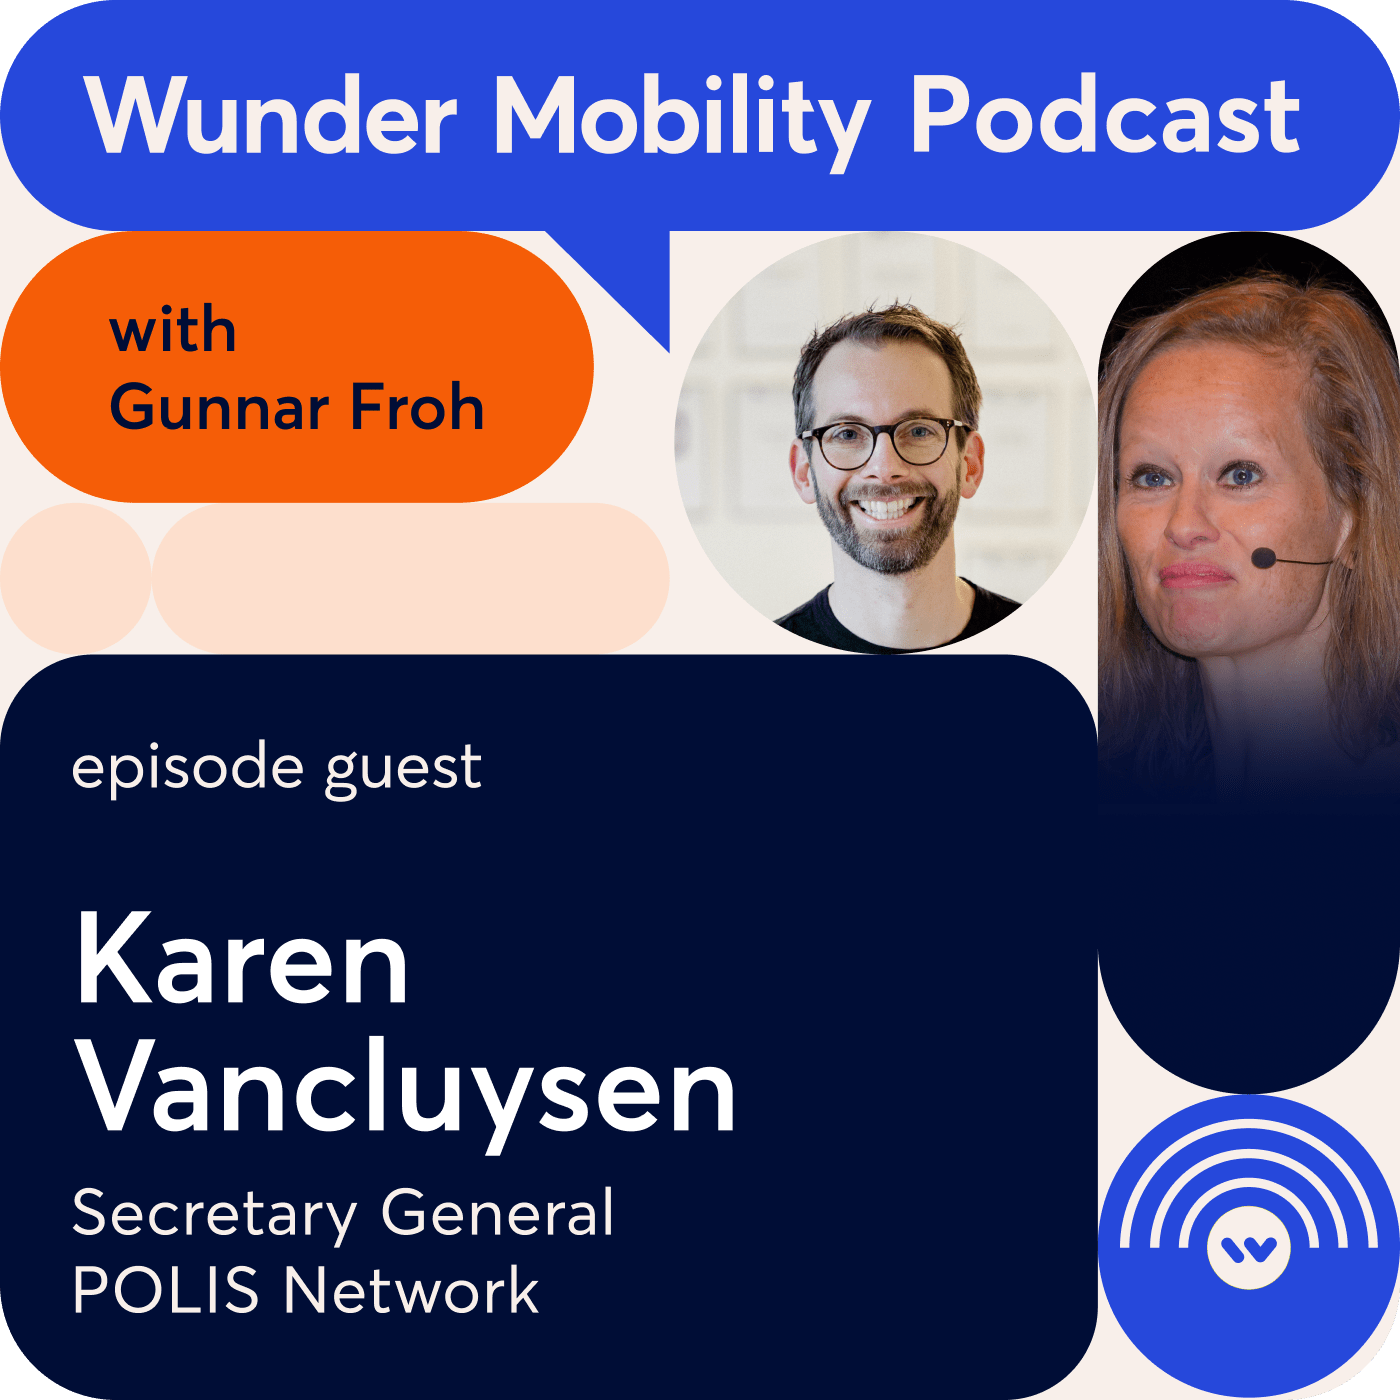 Wunder Mobility Podcast with Karen Vancluysen, Secretary General at Polis and Gunnar Froh bubble shaped images.